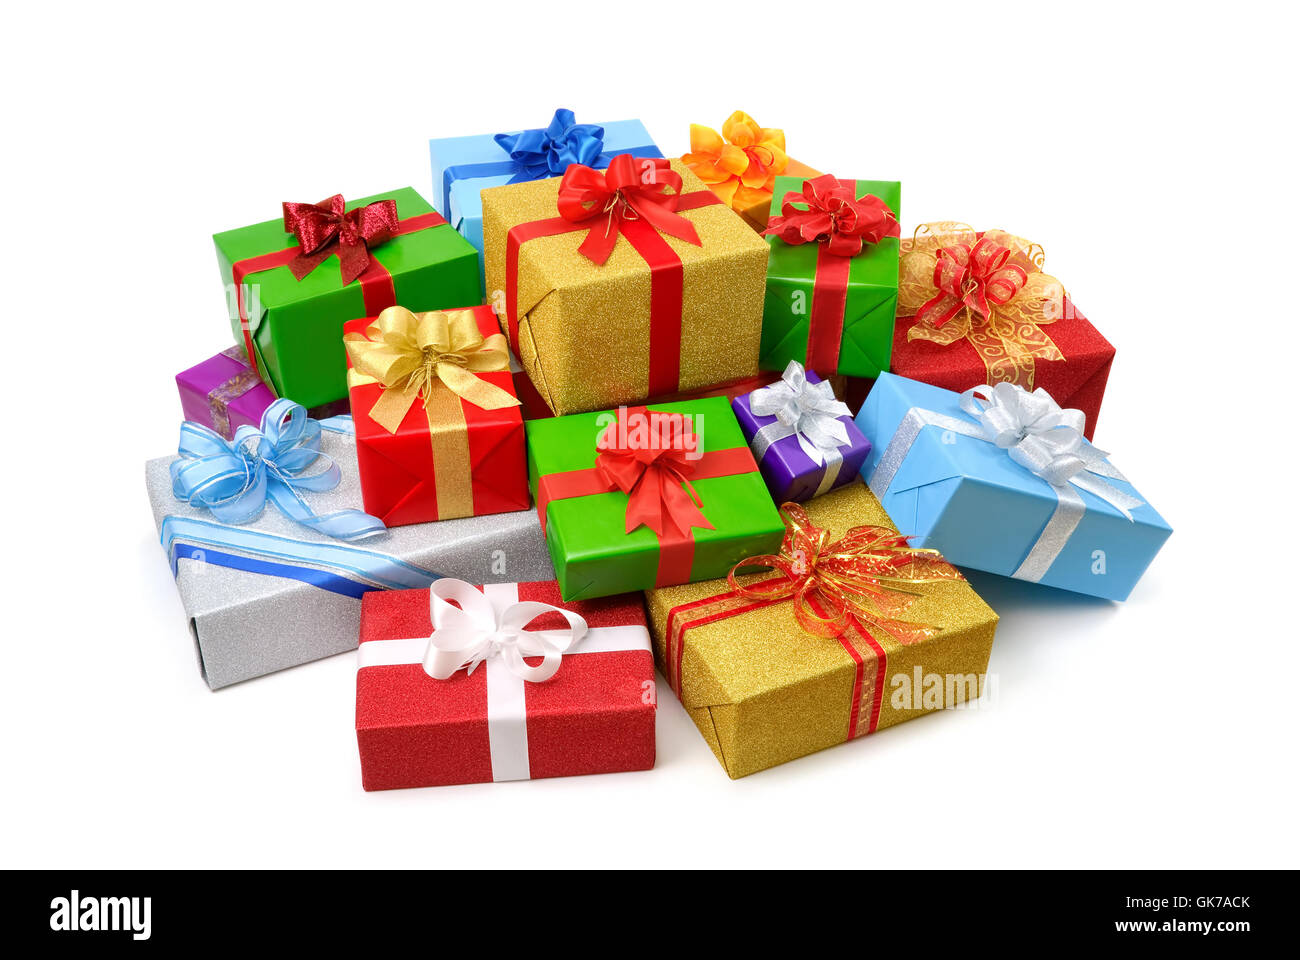 cheerful bunch of colorful gifts Stock Photo